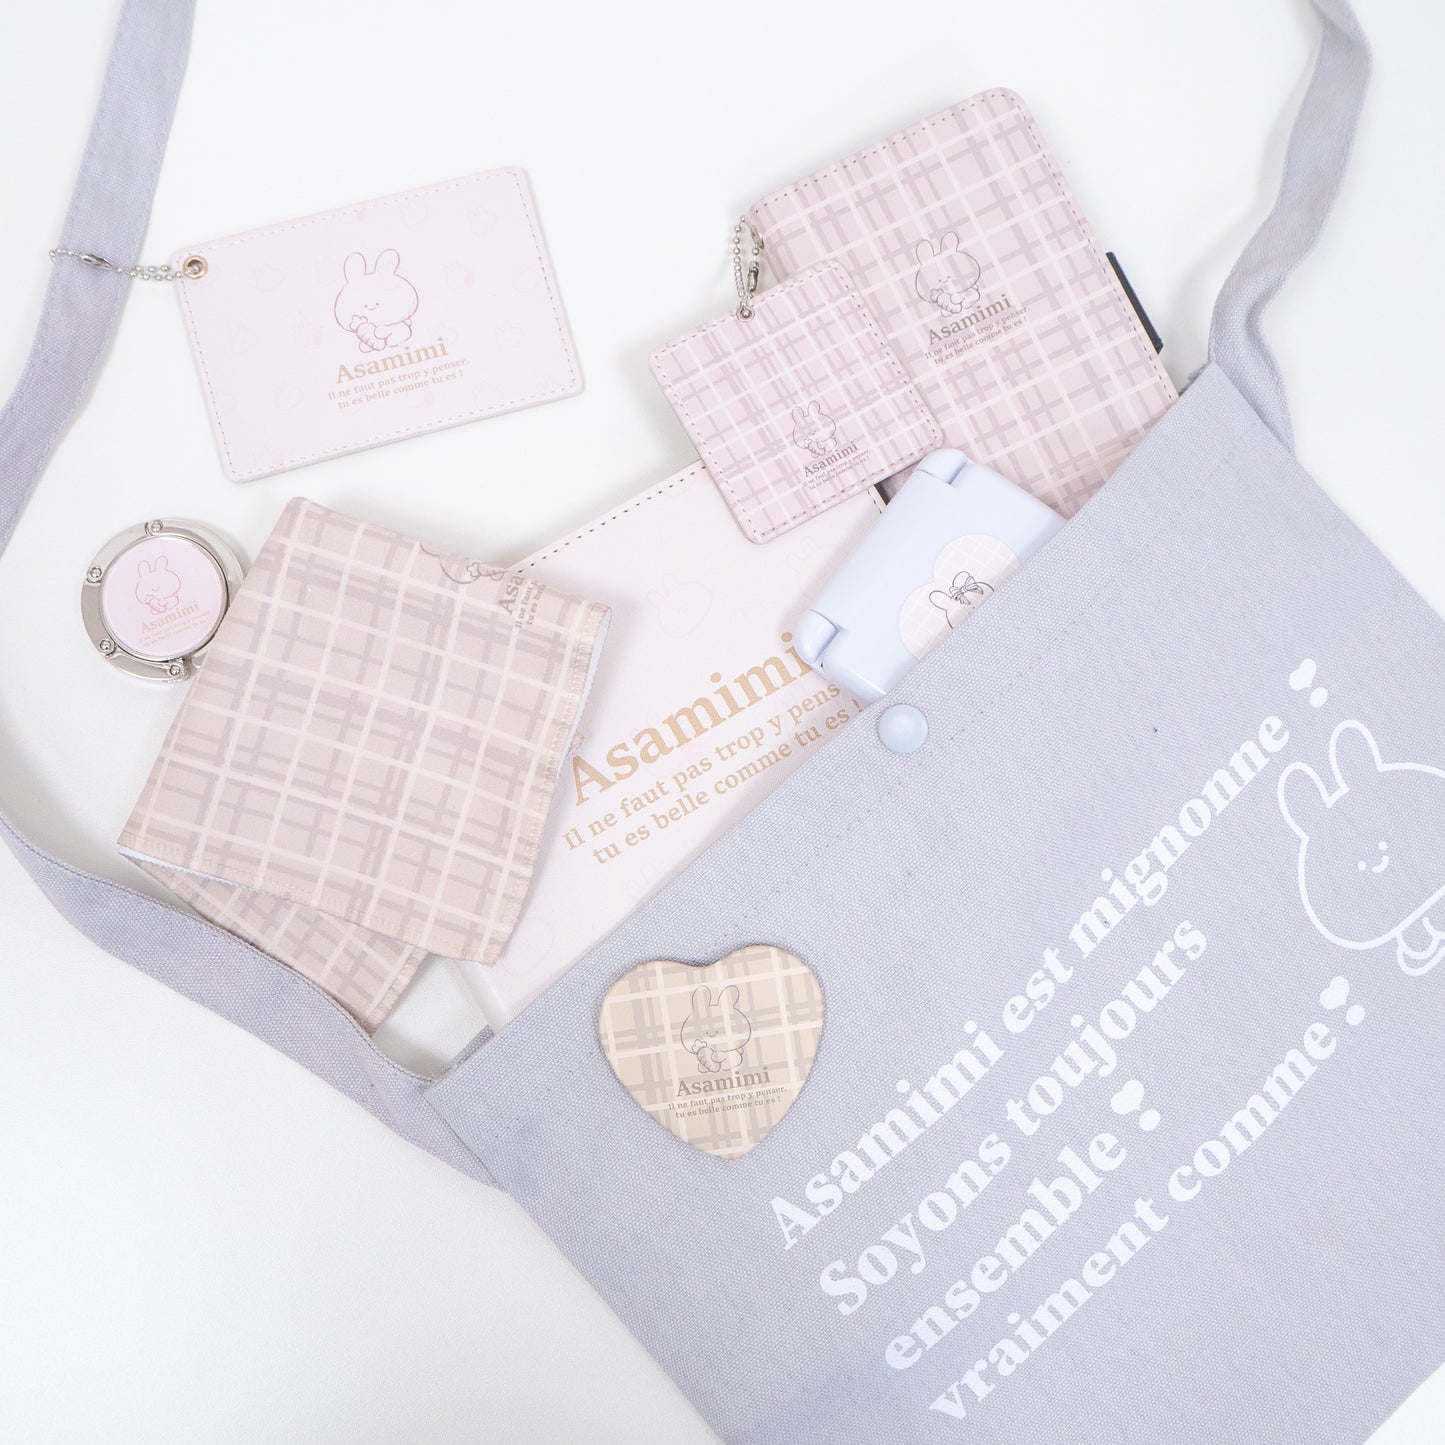 [Asamimi-chan] Bag hanger (French girly) [Shipped in early December]